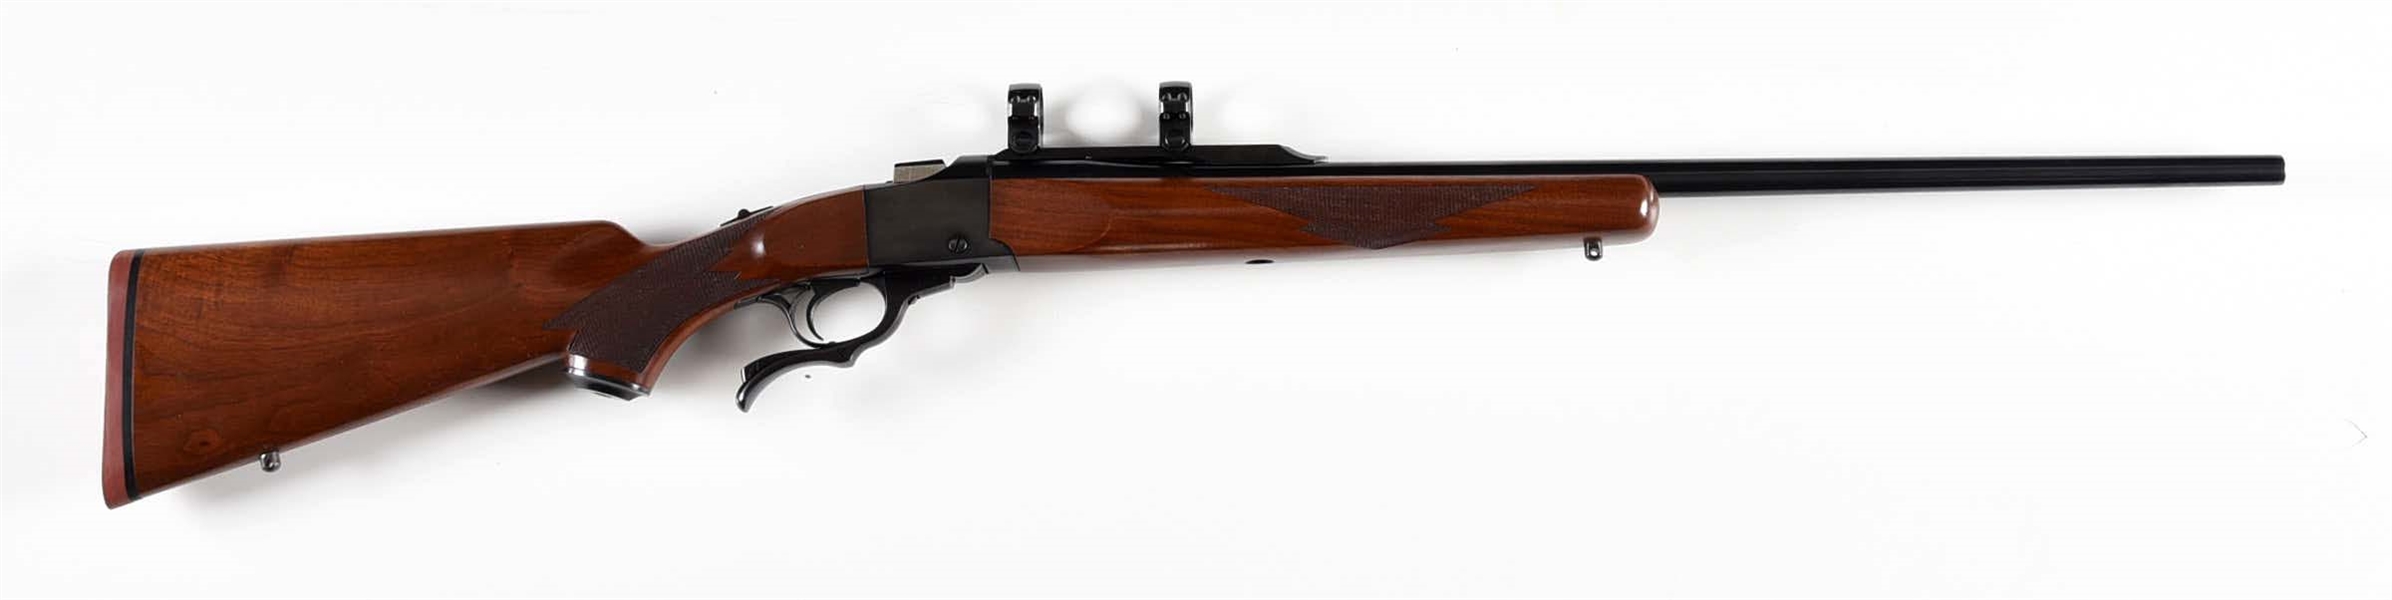 (M) RUGER NO. 1 SINGLE SHOT RIFLE IN .257 ROBERTS.